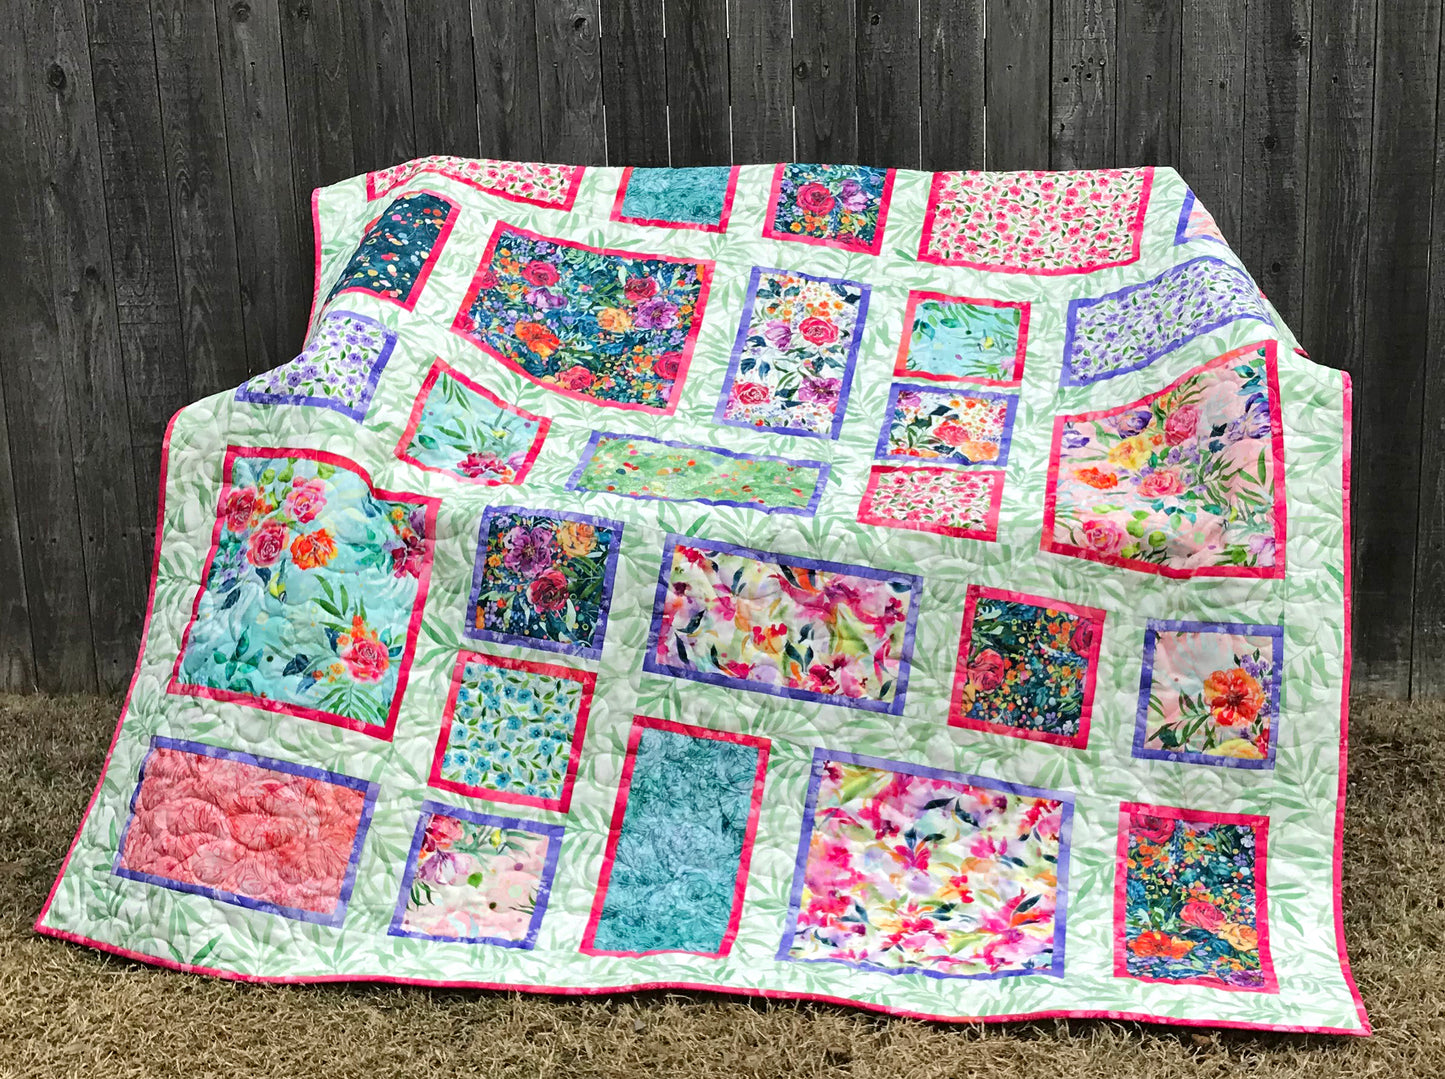 Handmade quilt featuring watercolor floral squares and rectangles framed with pink and purple fabric on a light green background. Quilt is shown displayed on a bench.